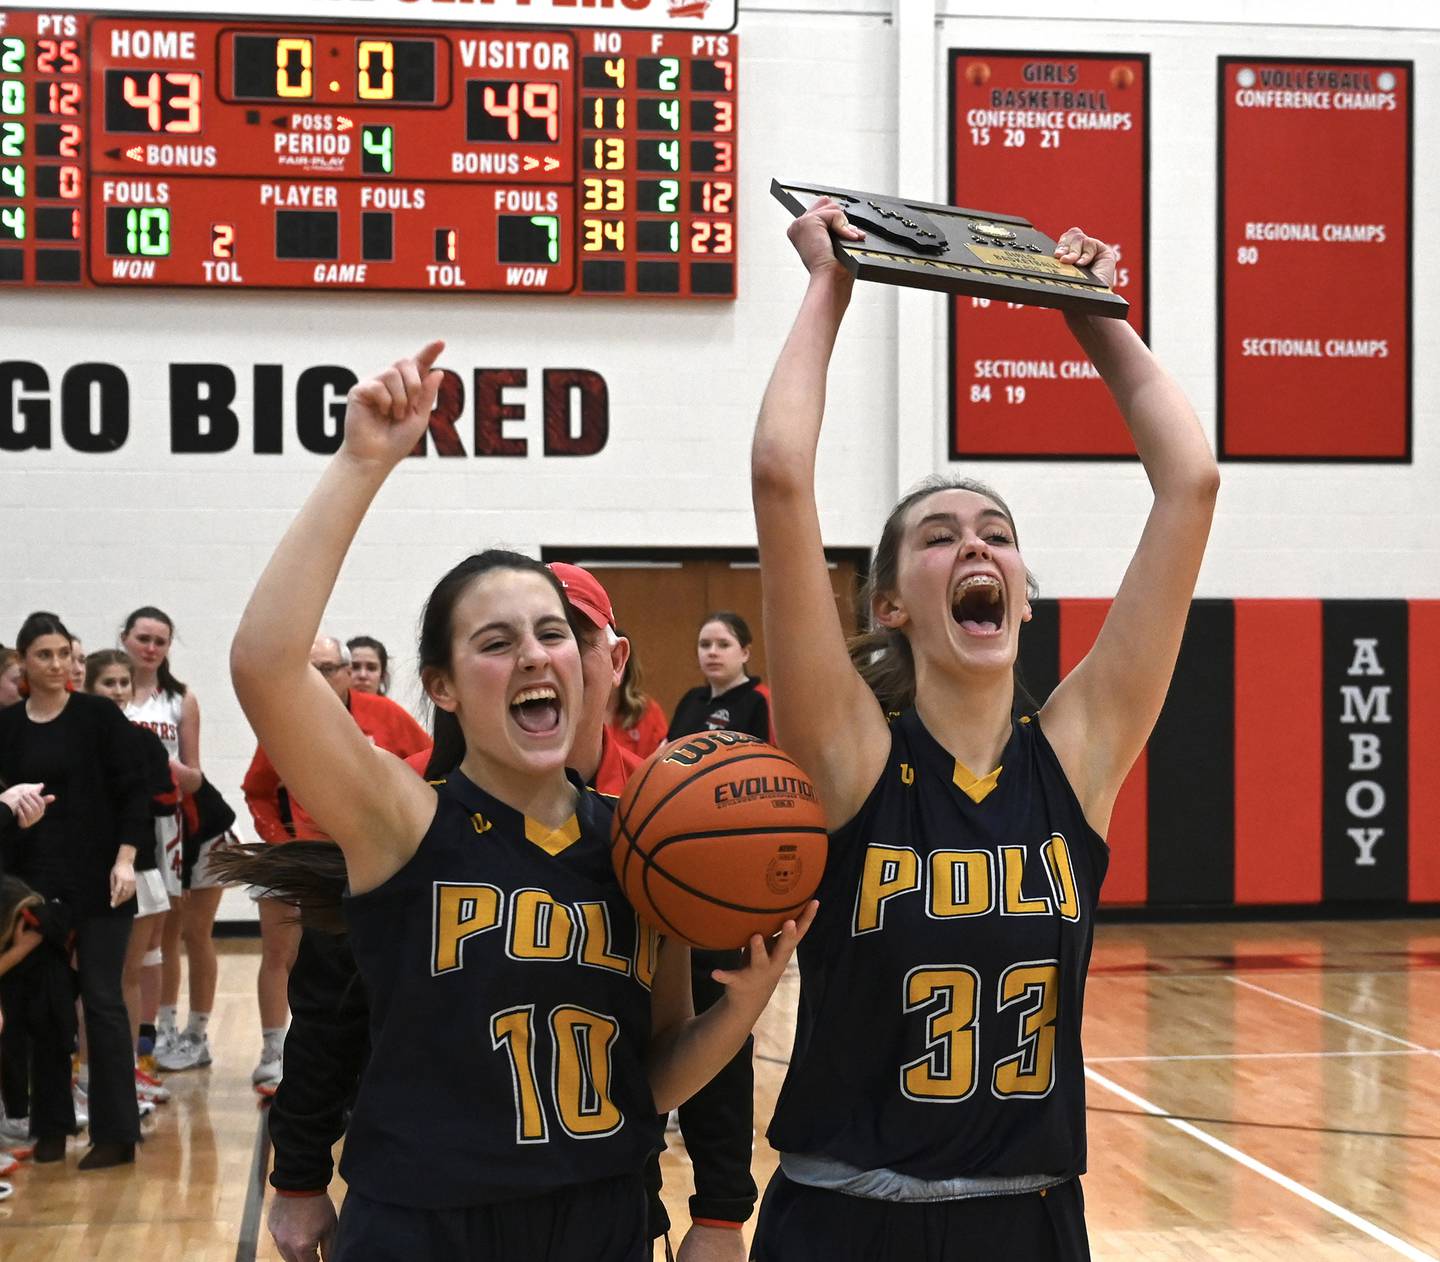 Polo's Annalise Stamm (10) holds the game ball while Lindee Poper (33) holds up the regional championship plaque Friday night in Amboy. The Marcos won their first regional title since 2008.